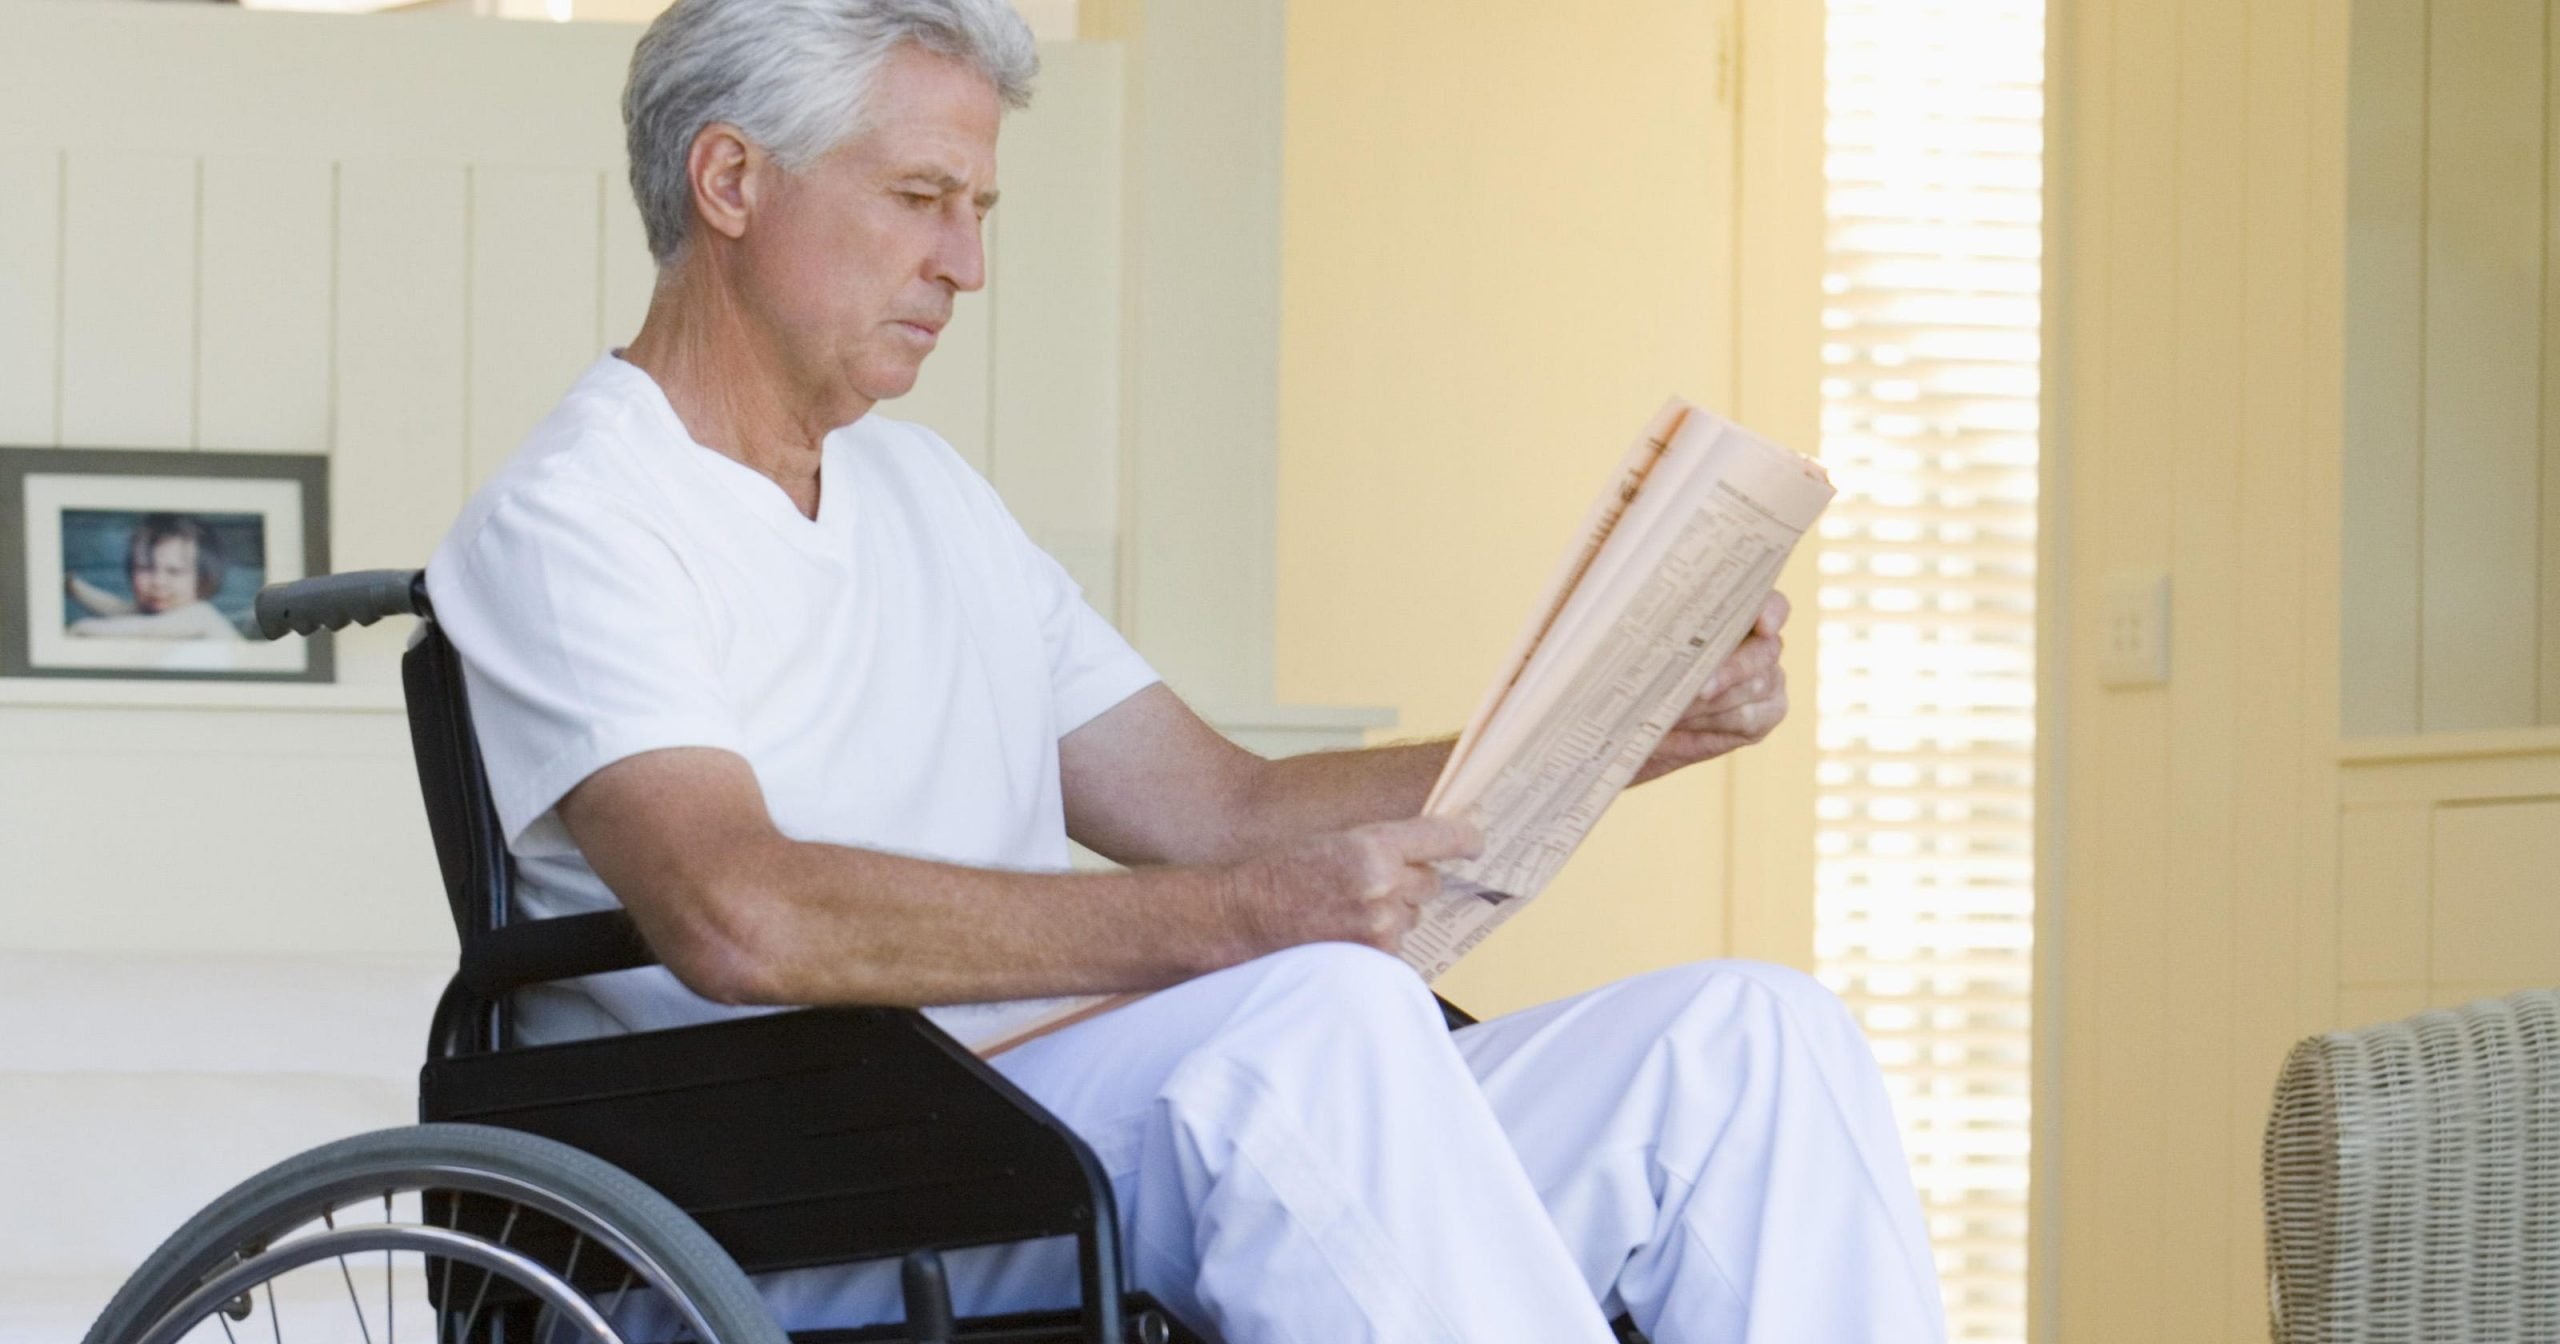 How do I apply for Social Security disability benefits?